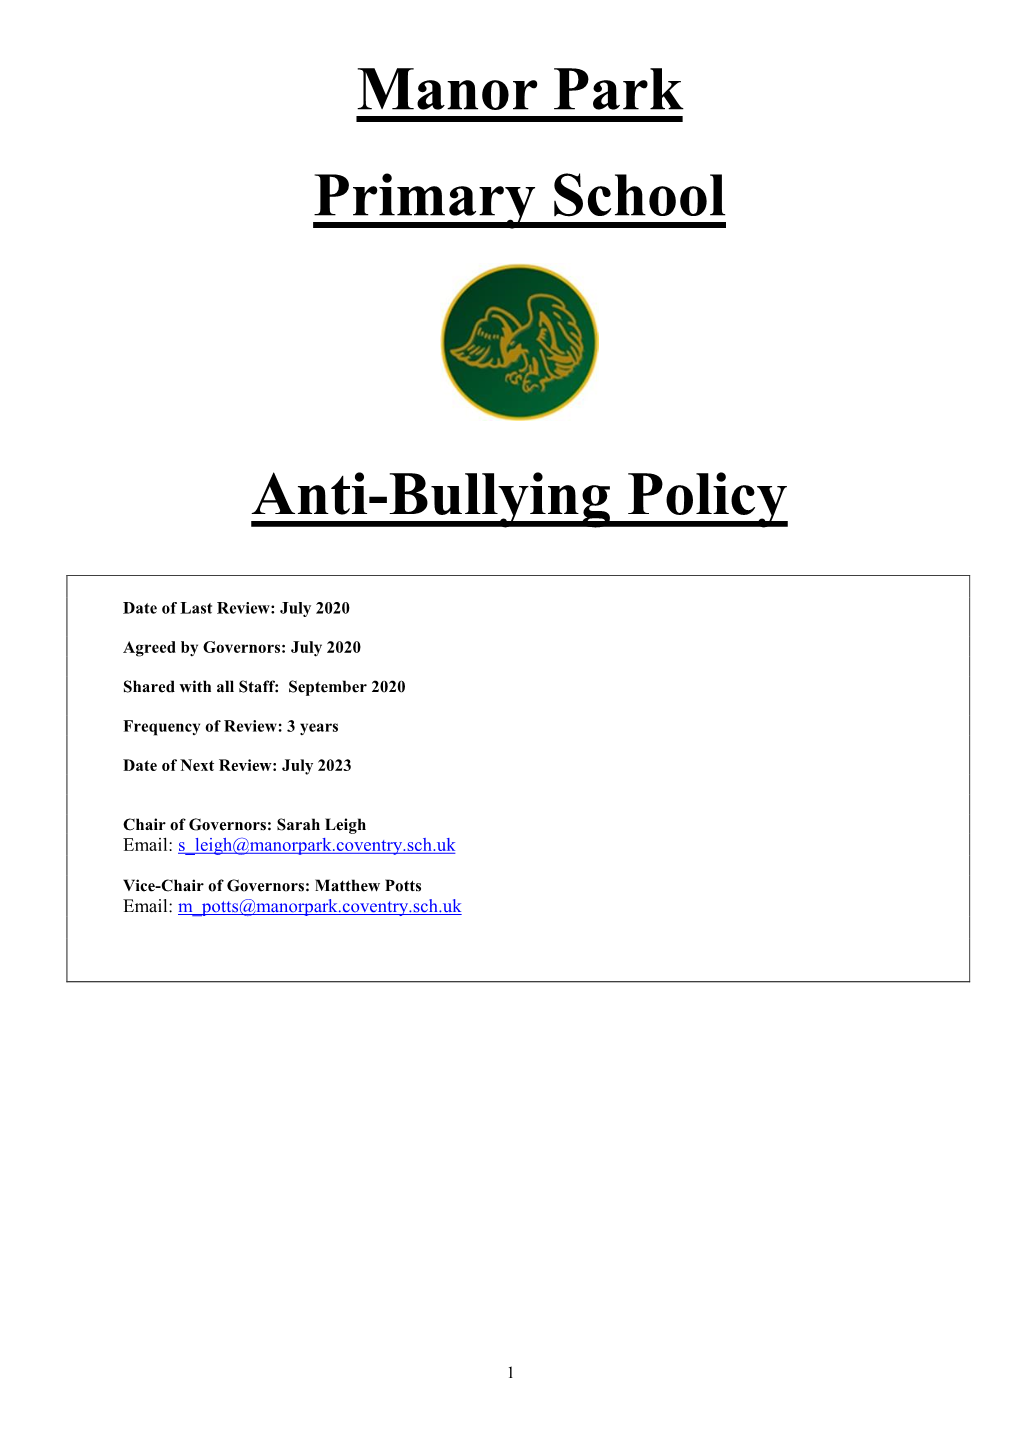 Manor Park Primary School Anti-Bullying Policy